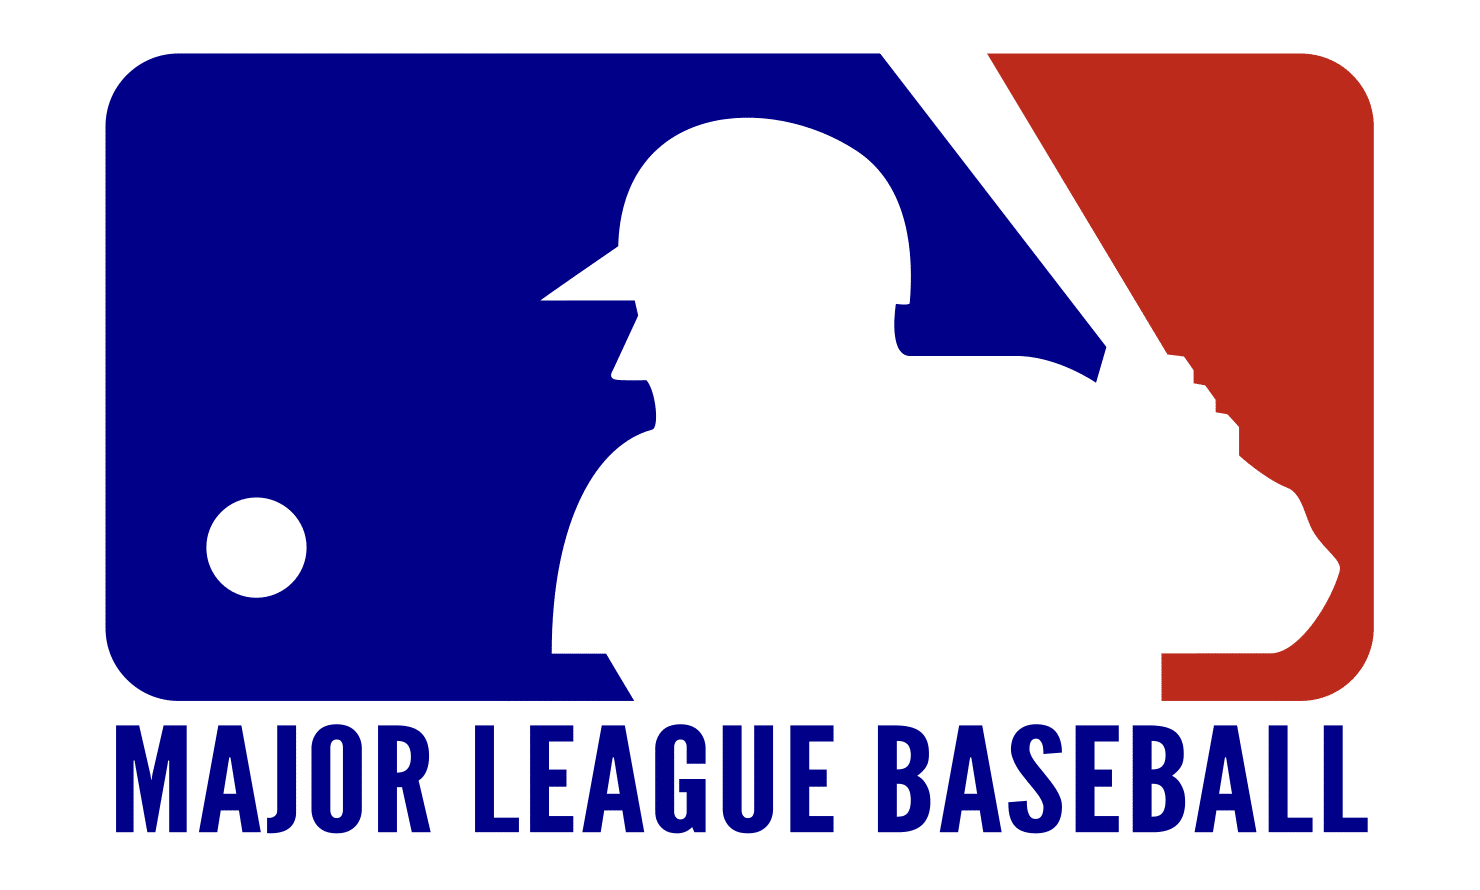 Report: Some MLB Owners “Do Not Want to Play This Year”